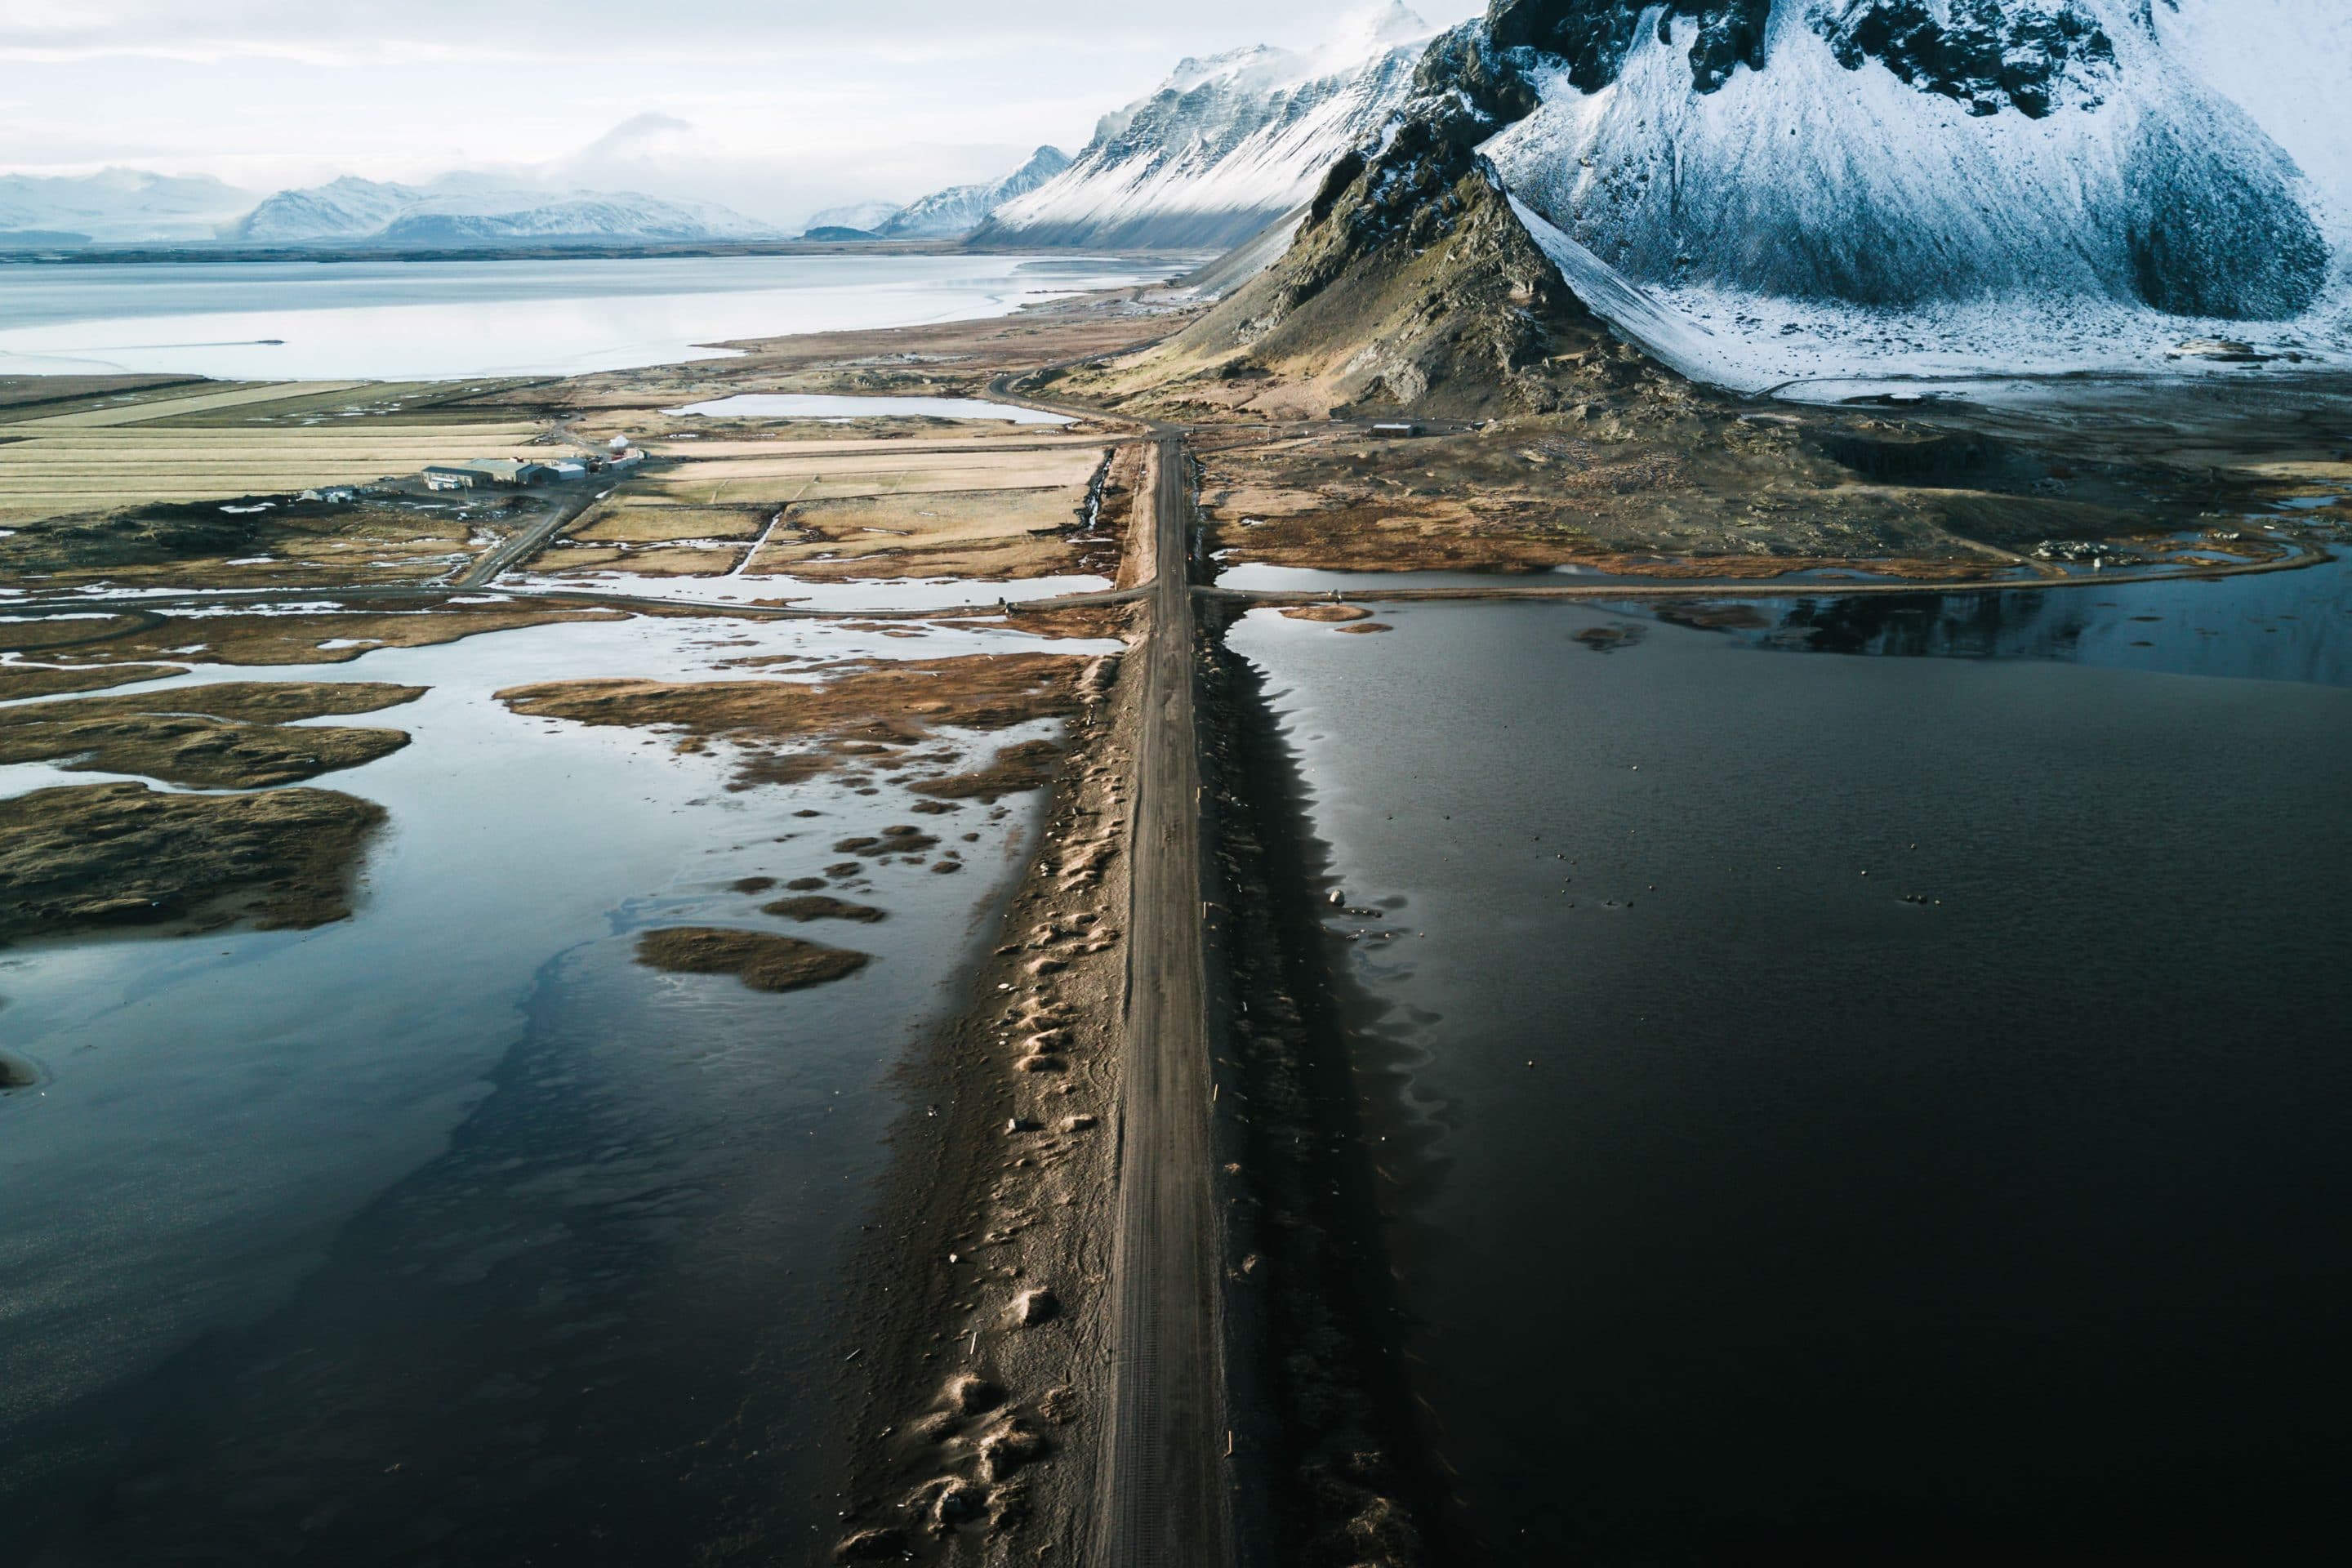 The Stokksnes peninsula in Iceland during a sunset dipping the mountain and beach landscape in moody light by photographer Michael Schauer